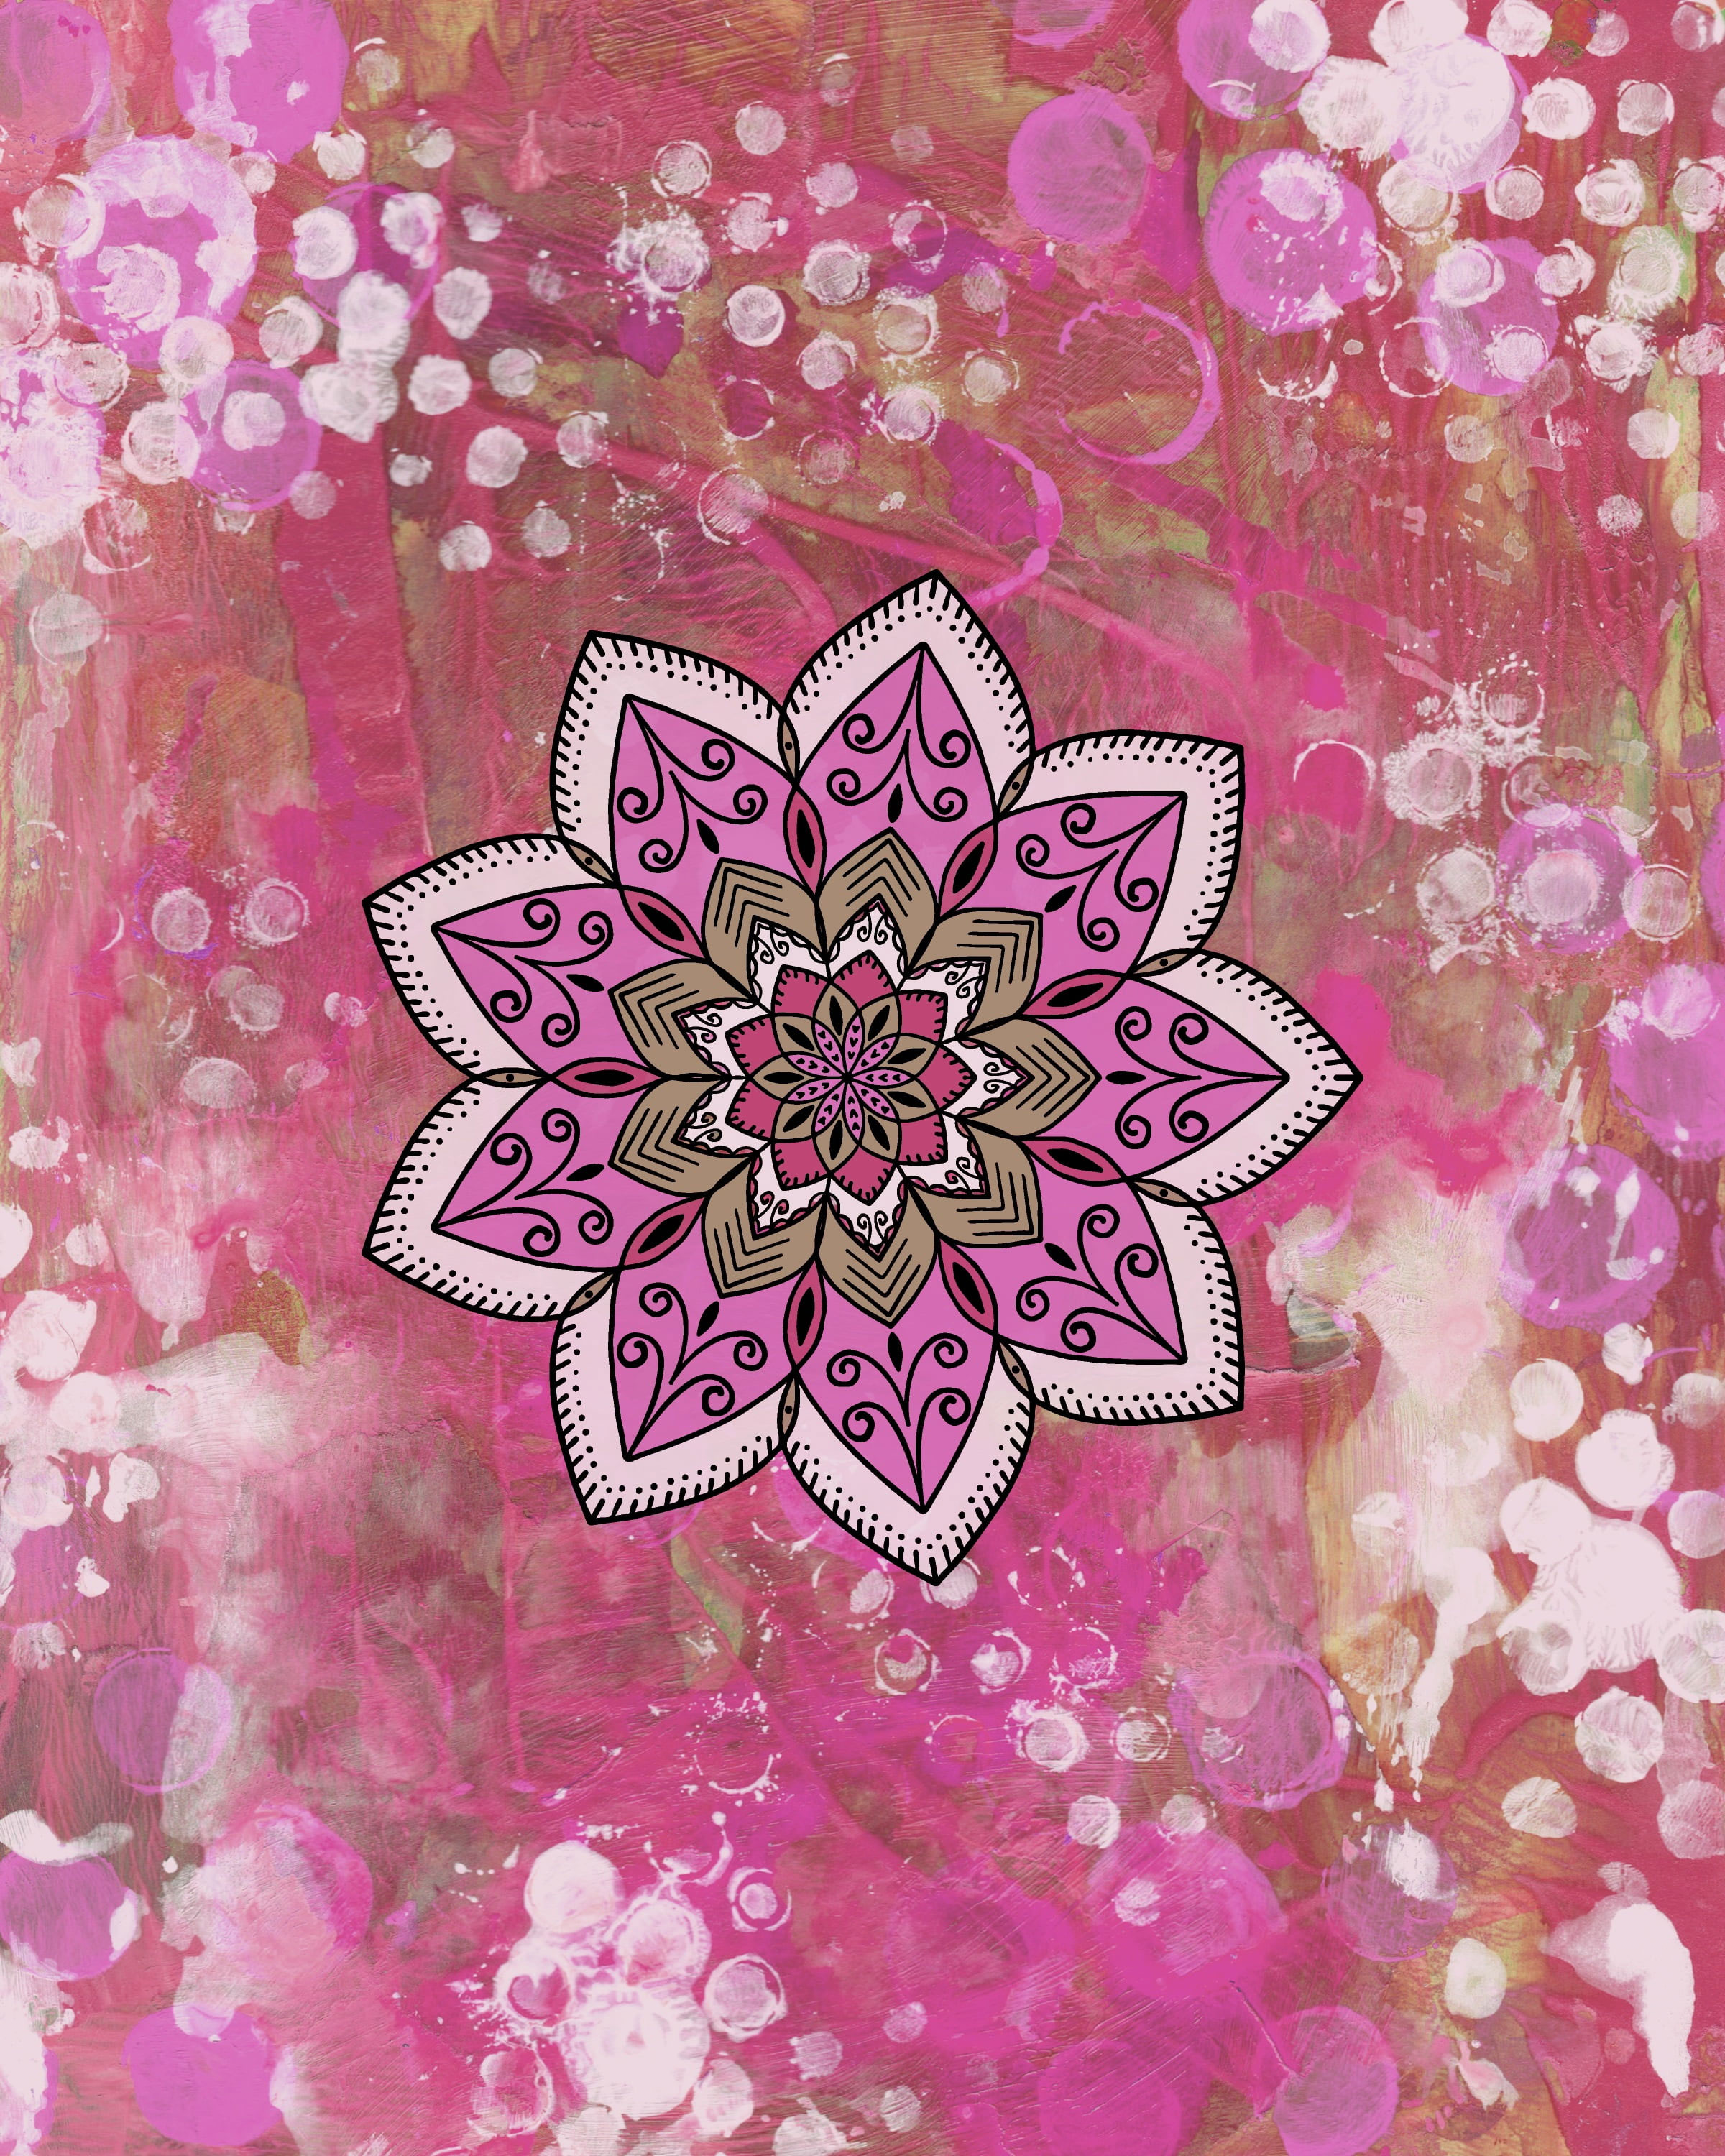 Wallpaper Mandala, Patterns, Stains, Texture, Pink Color, Abstract, Abstract